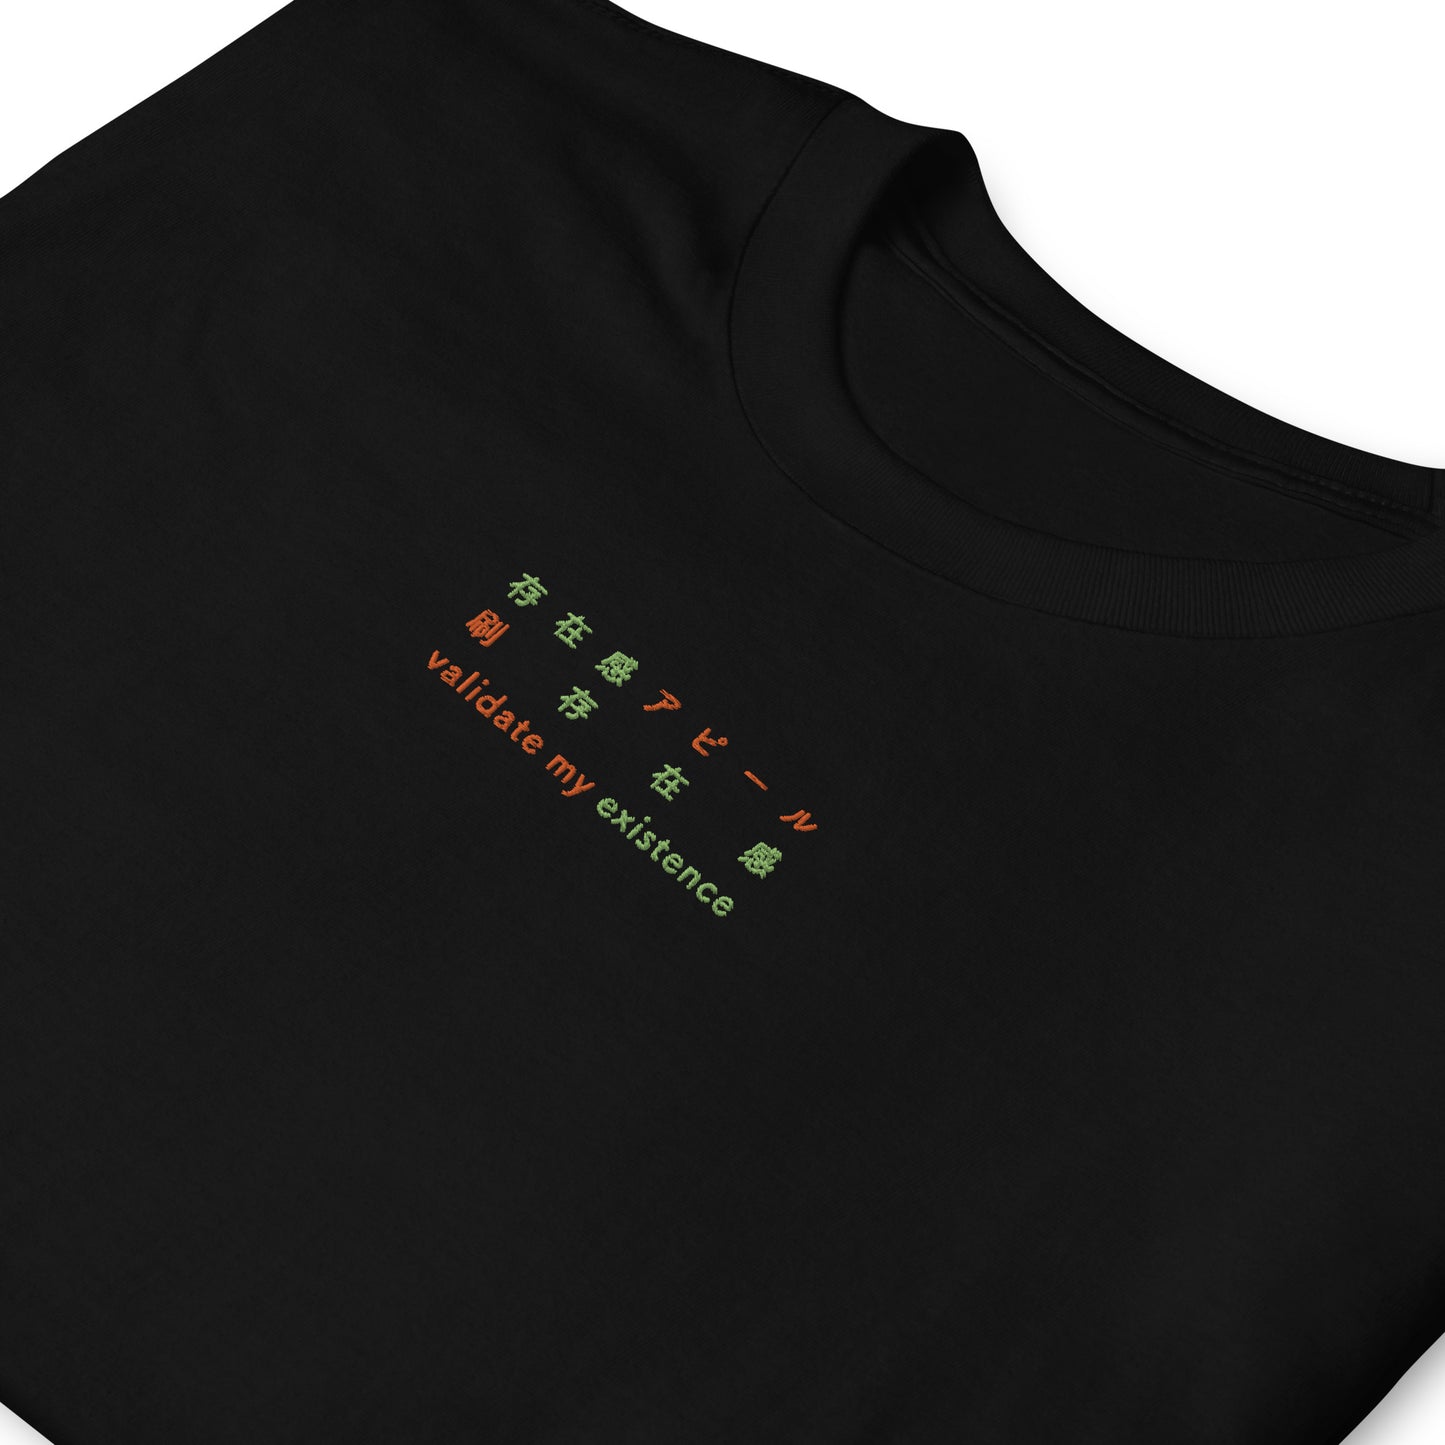 Black High Quality Tee - Front Design with an Orange,Green Embroidery "Validate my Existence" in Japanese,Chinese and English